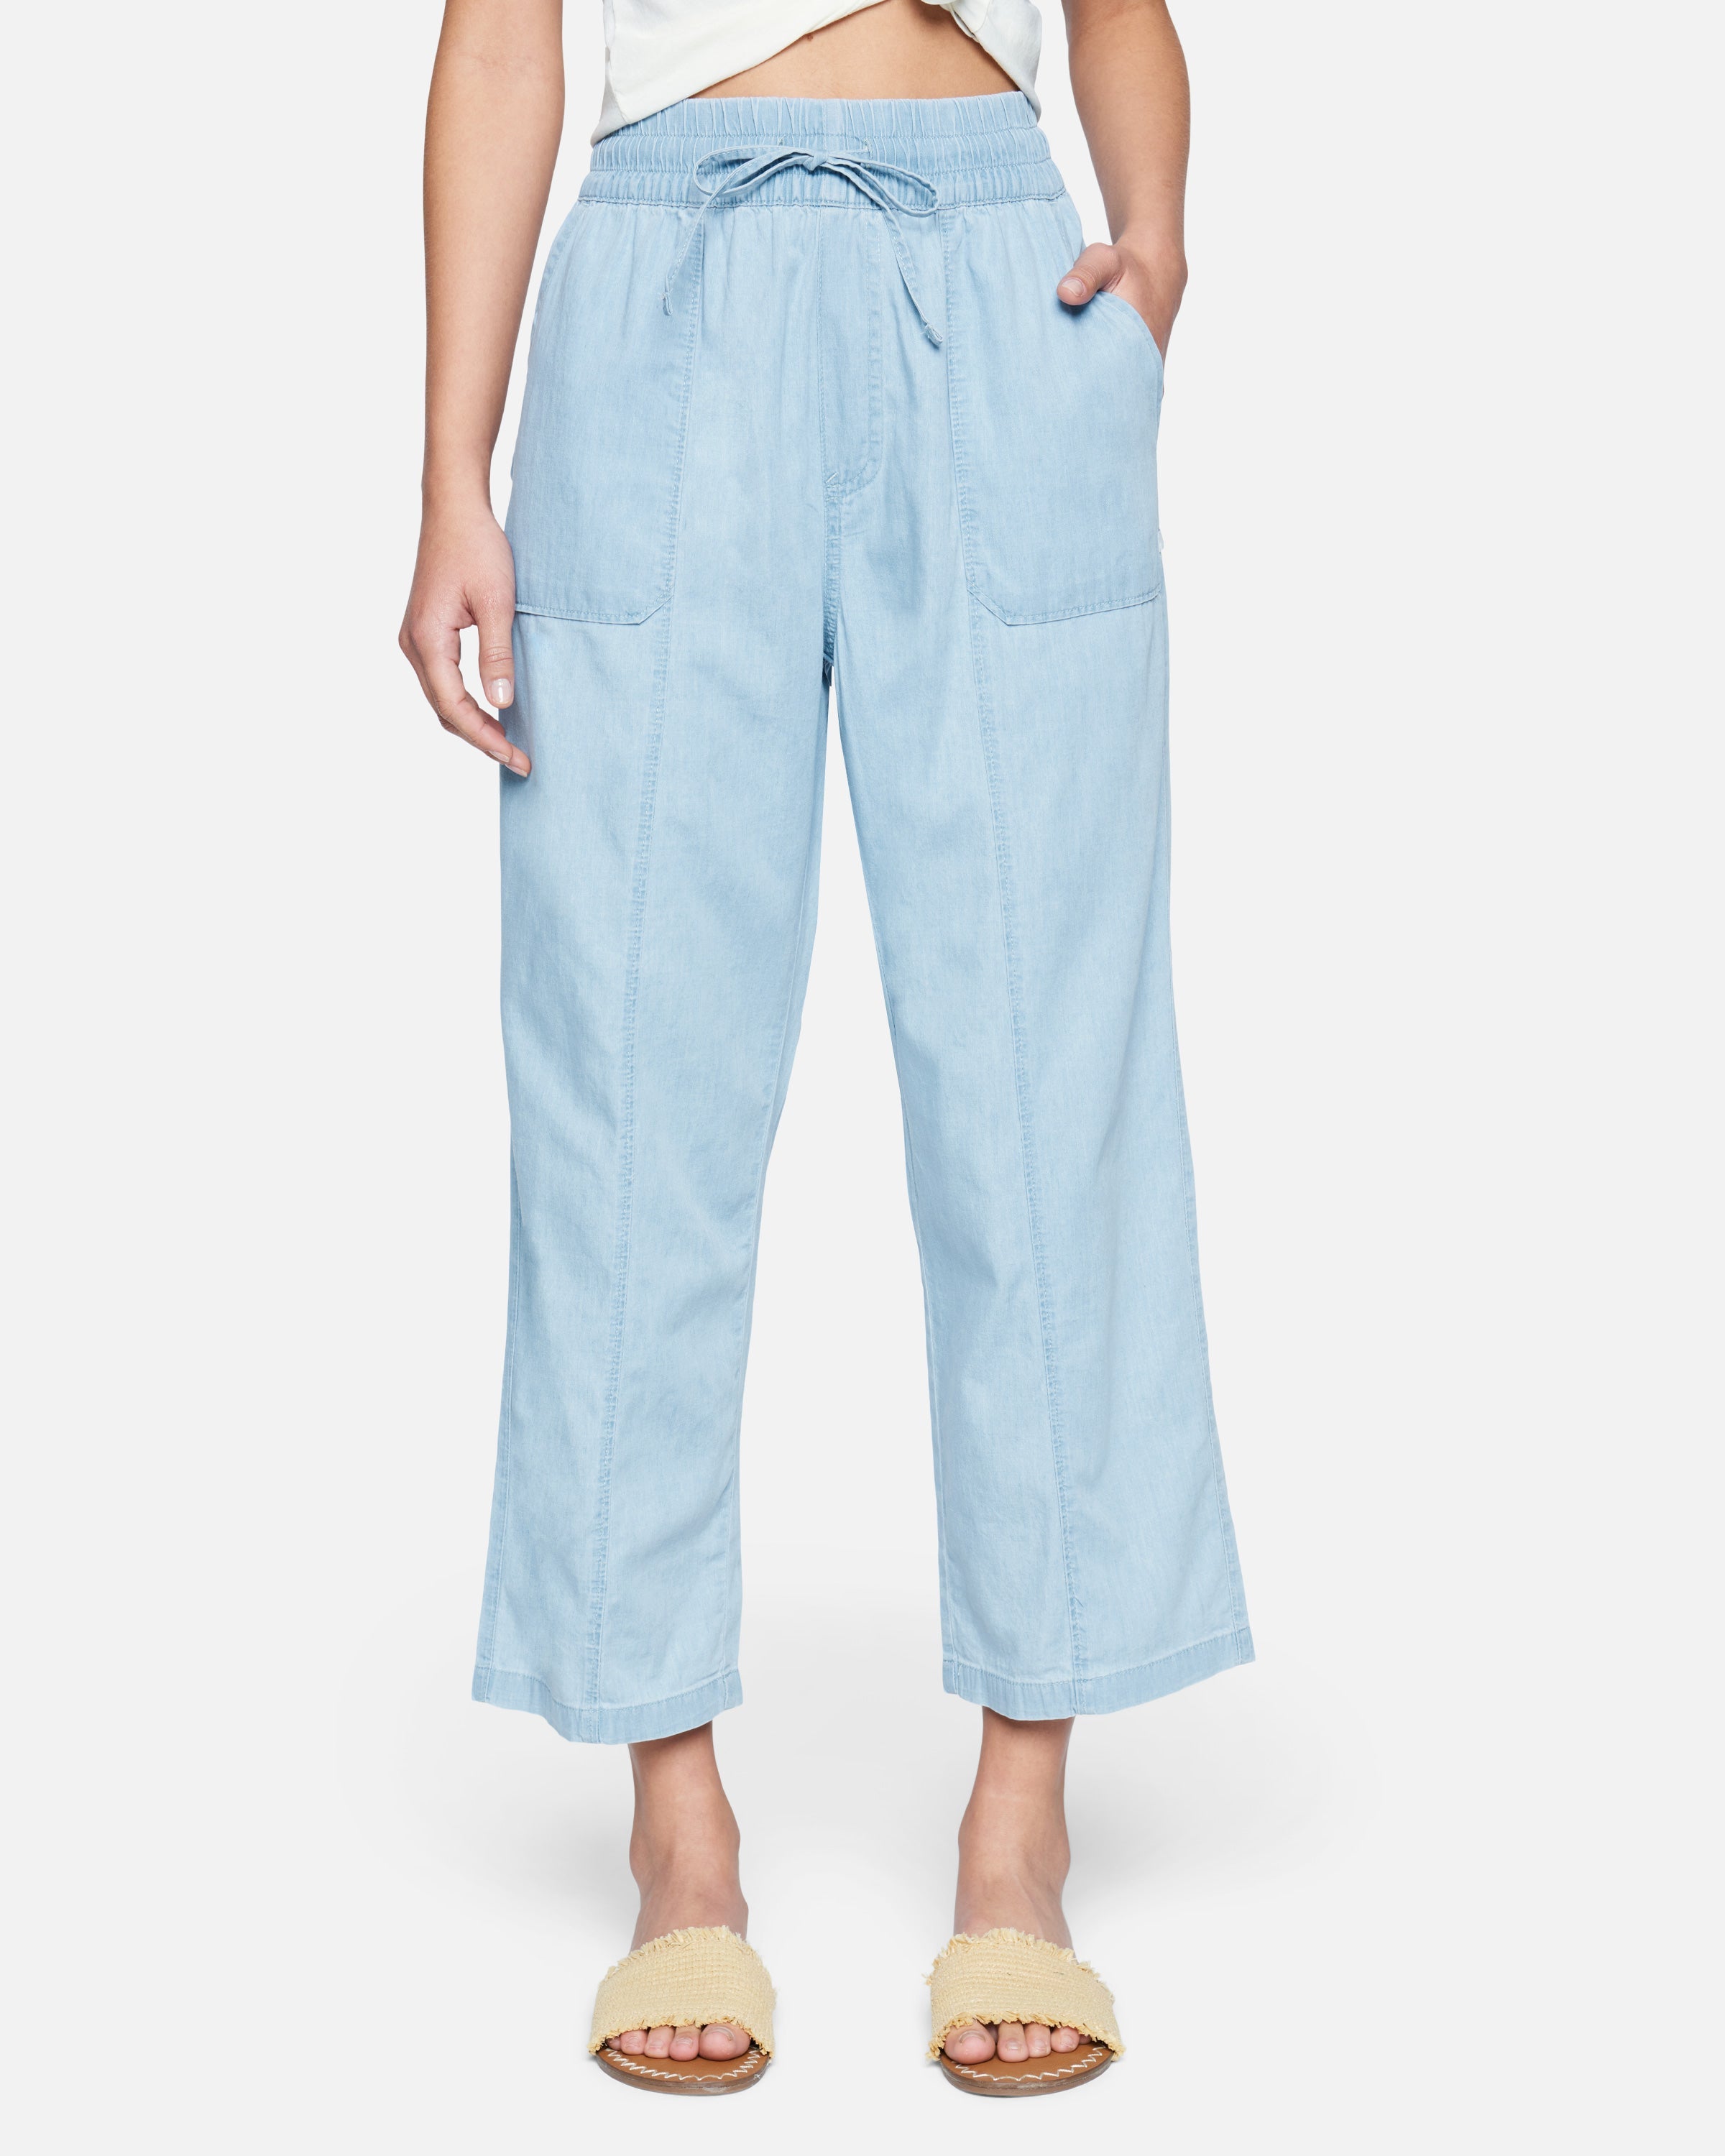 Hybrid Apparel Women's Chambray Utility Pants In New Age Bleach